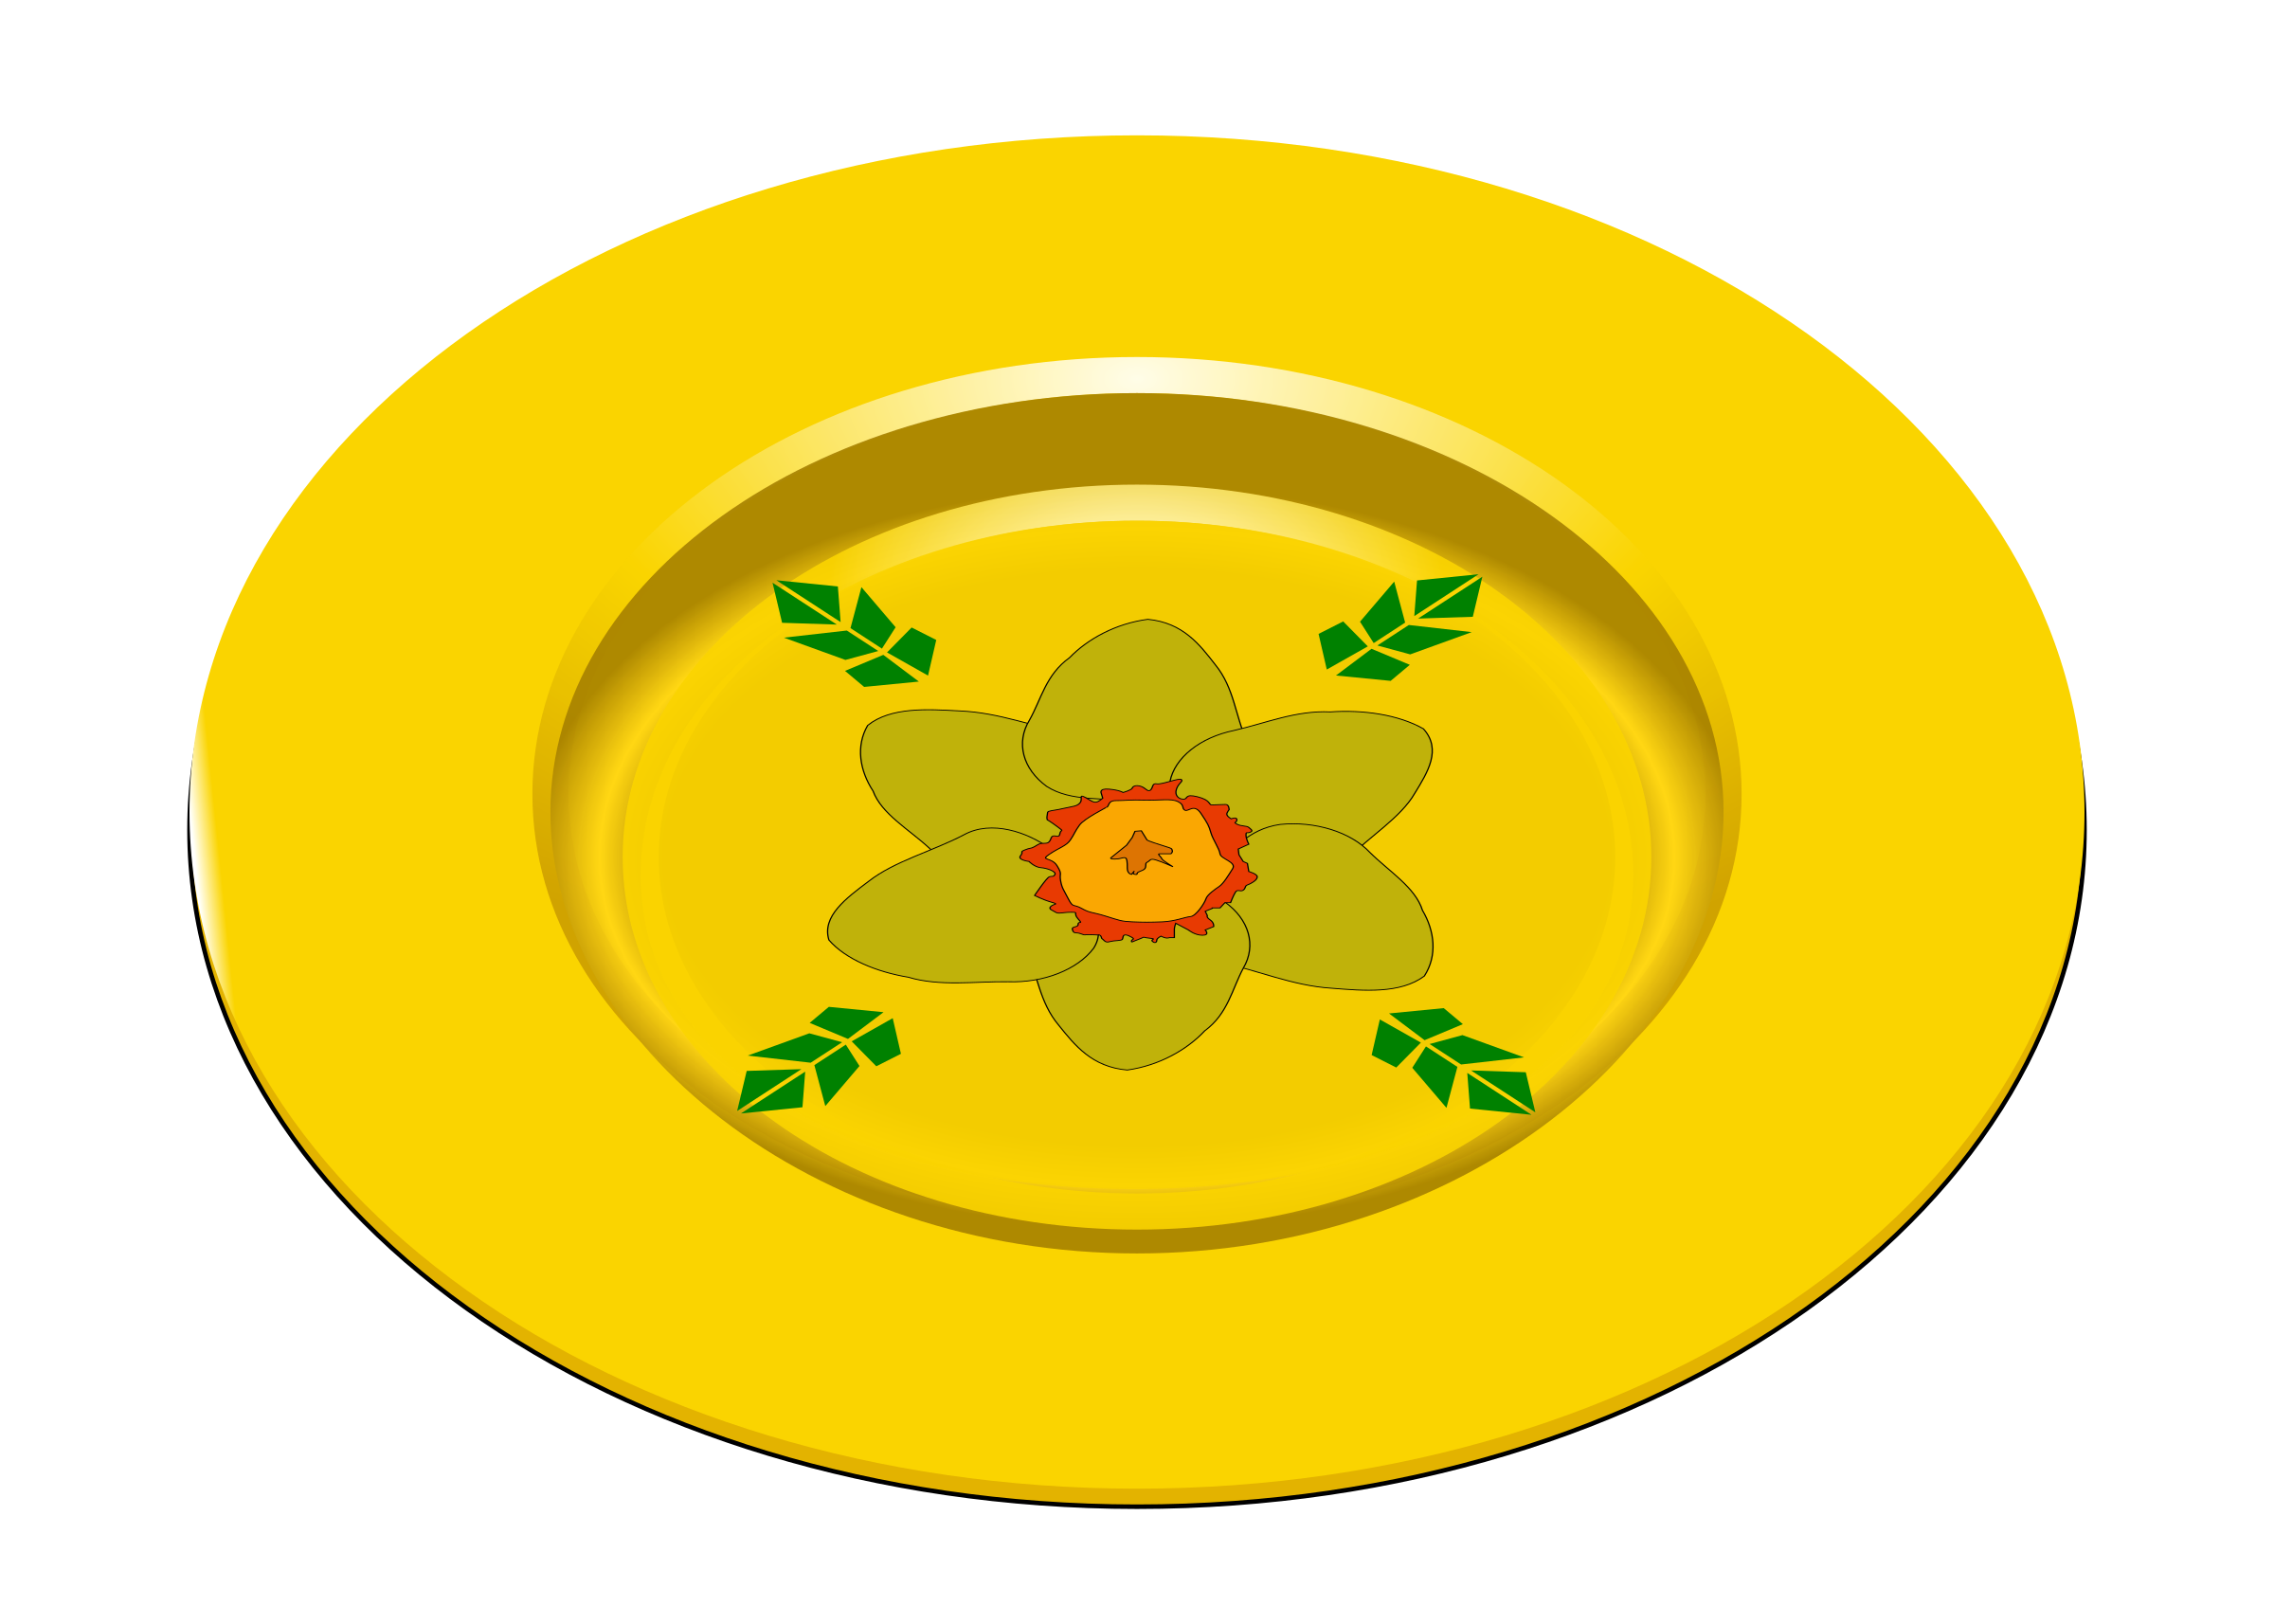 Golden Flower Plate Vector Clipart image - Free stock photo - Public